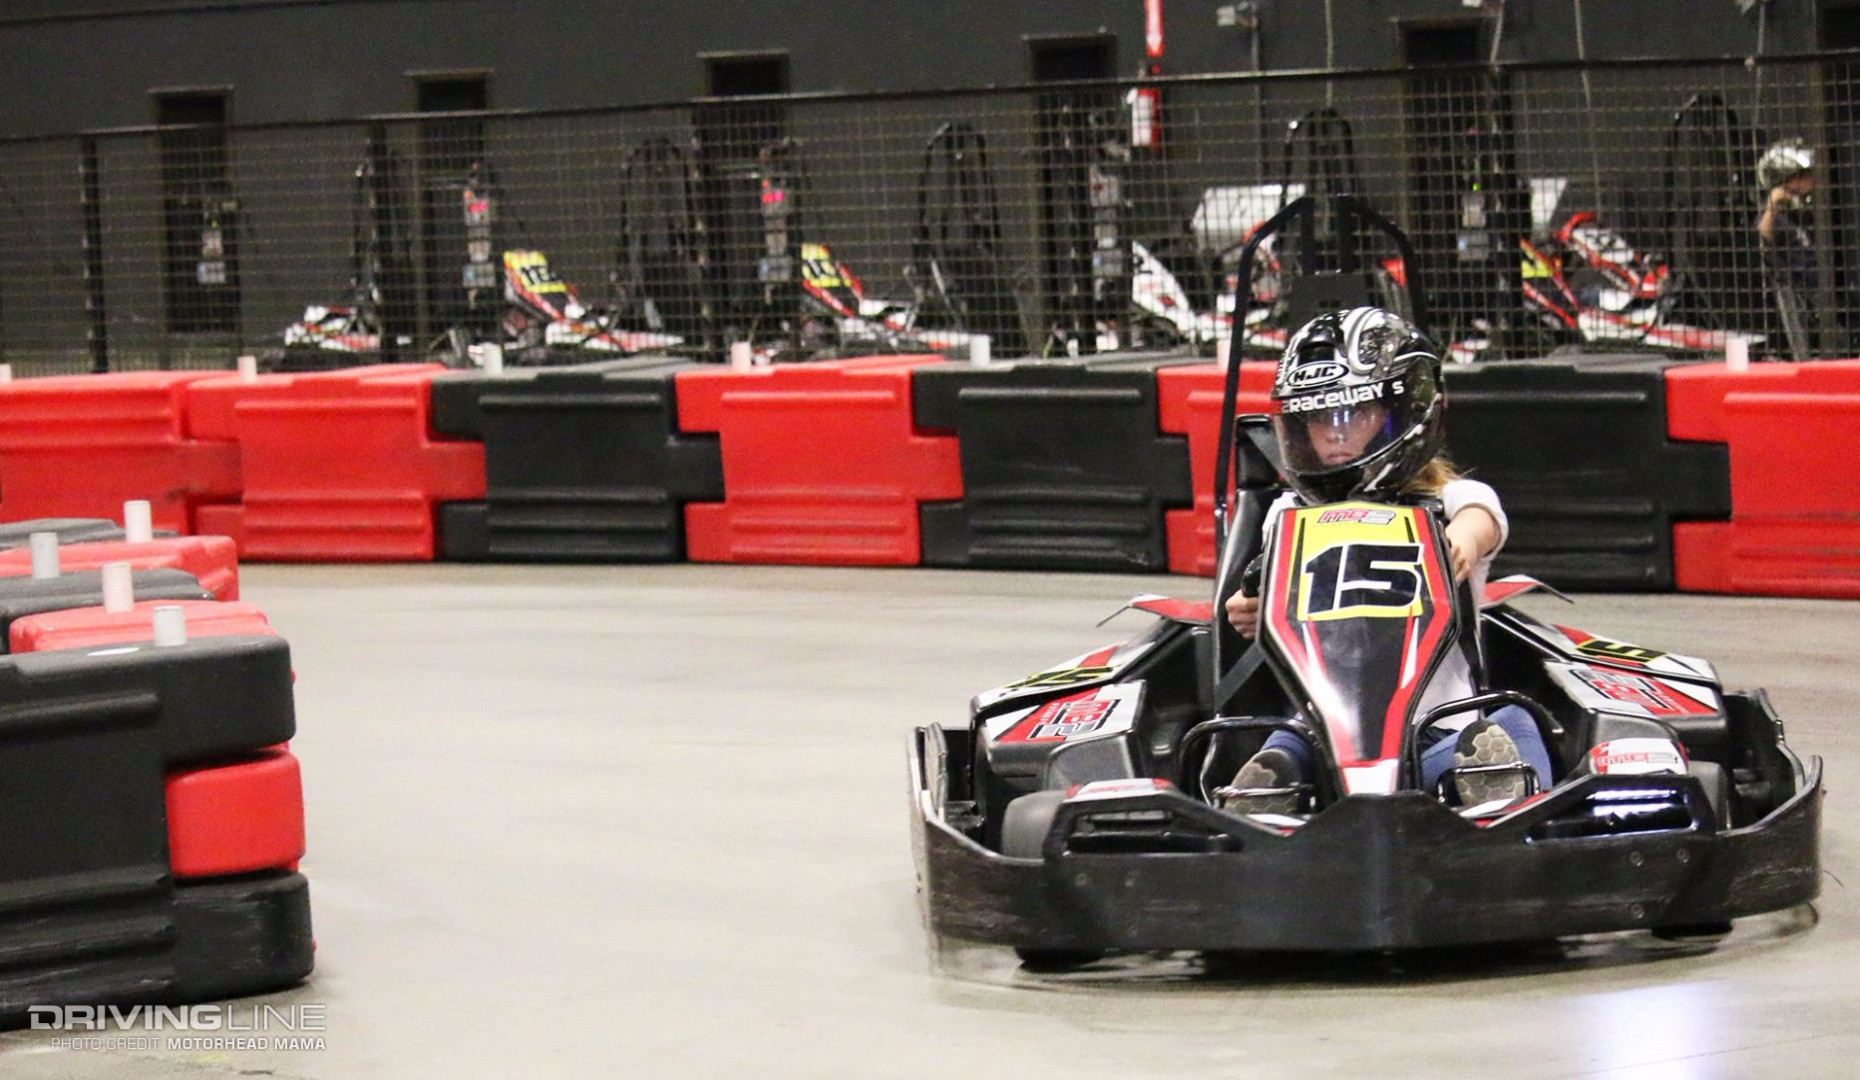 Indoor Go Karts For Kids
 7 Reasons To Take A Kid Go Kart Racing